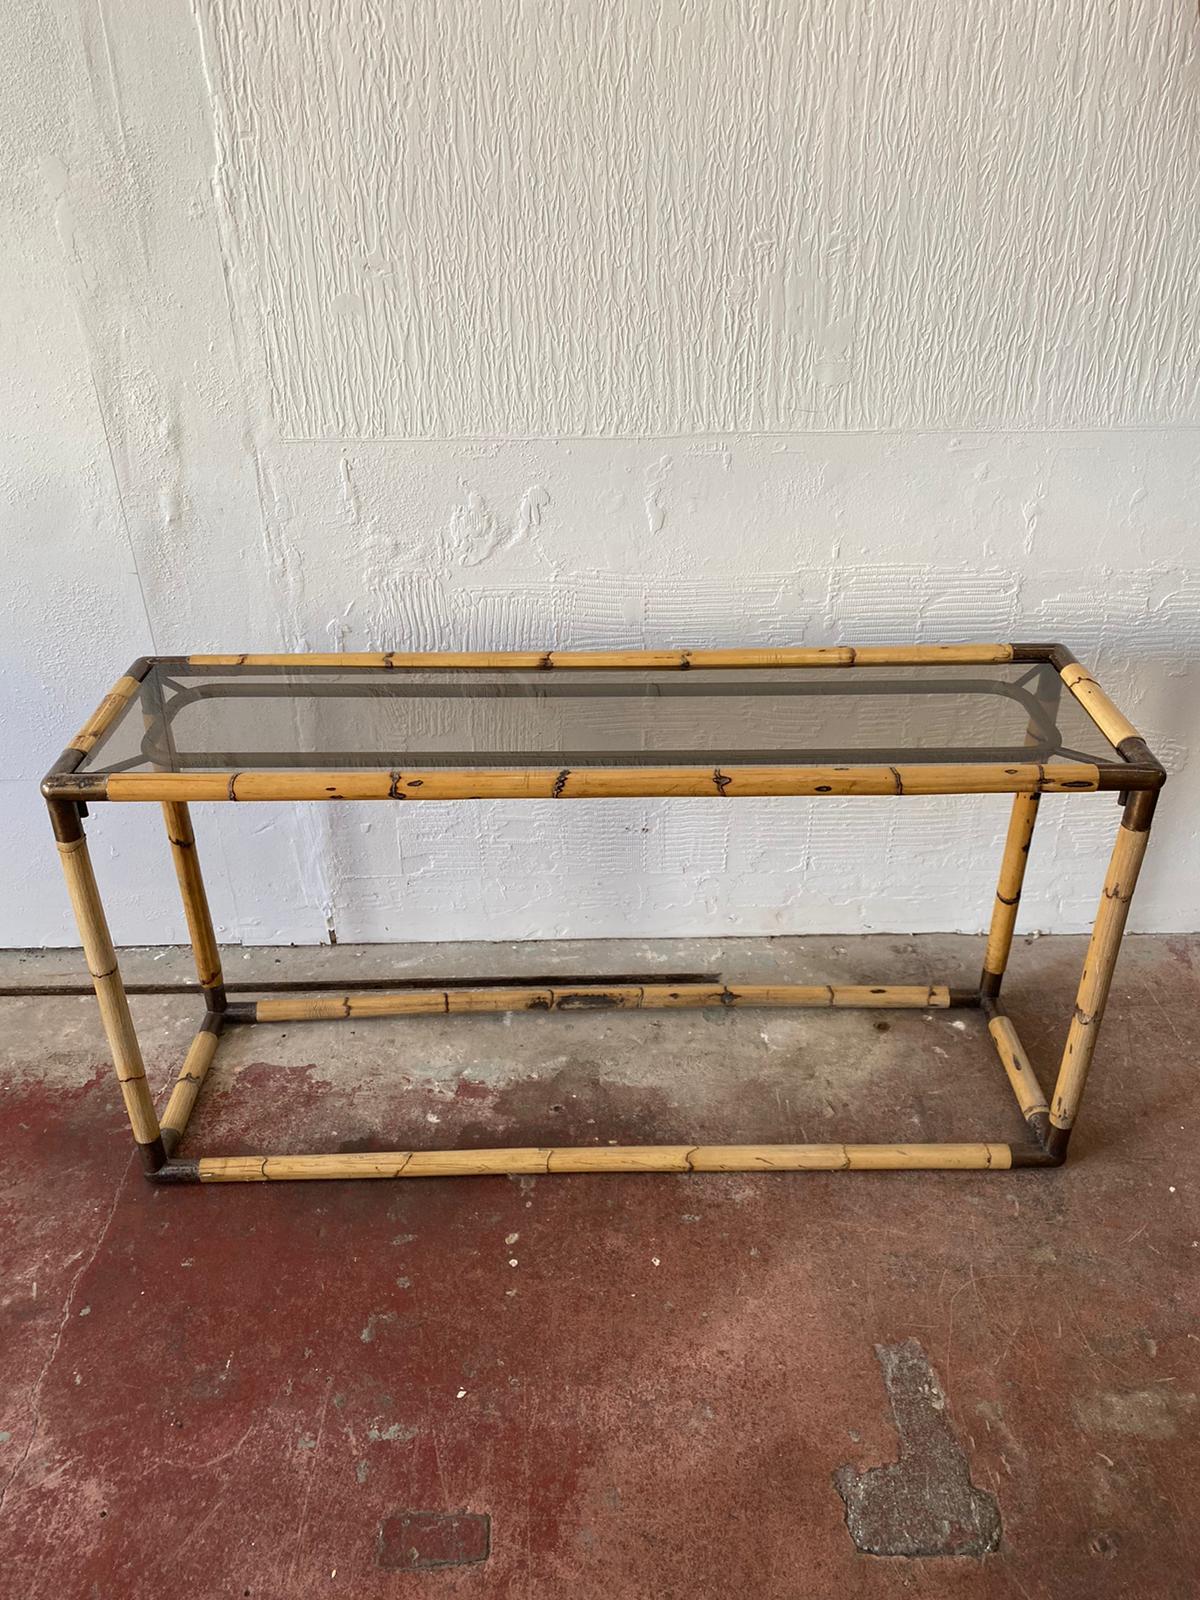 An elegant Italian Mid-Century Modern large bamboo and smoked glass console or sofa table by Giovanni Banci circa 1970. 
The original smoked glass top accompanies the piece, bronzed corners and connections with aged apperance. The natural bamboo has